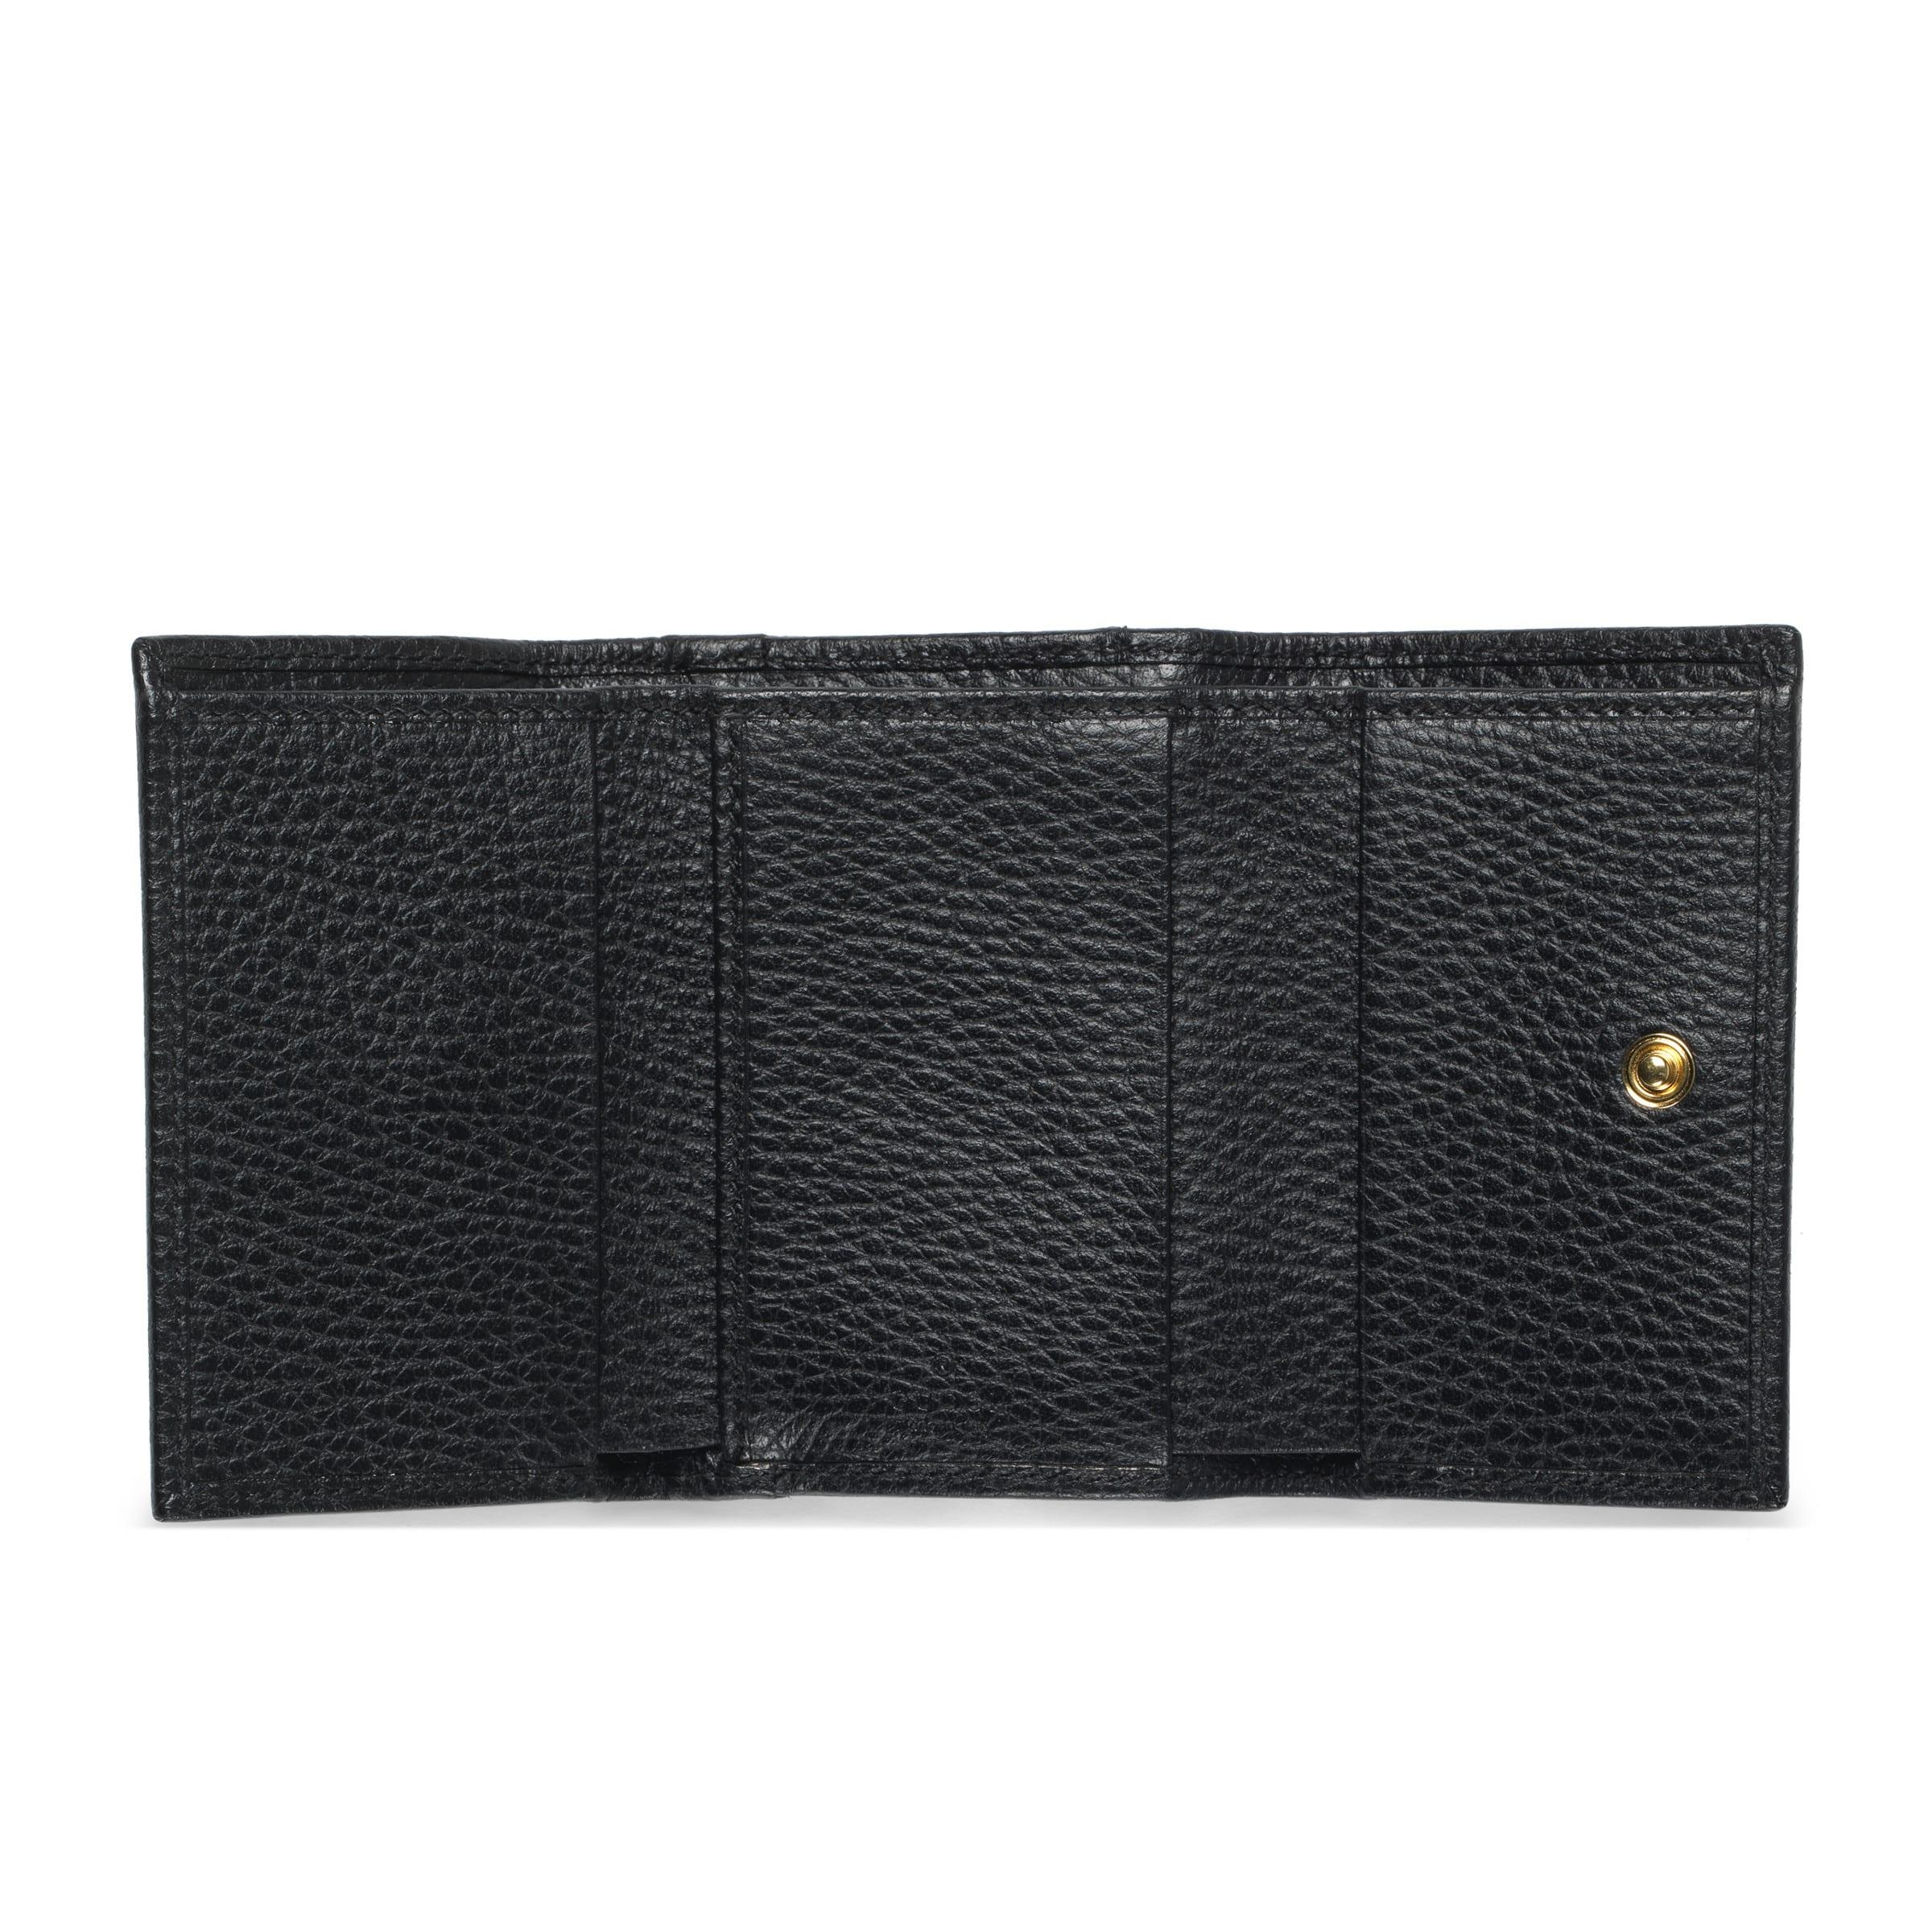 GG Marmont medium wallet in black leather and GG Supreme